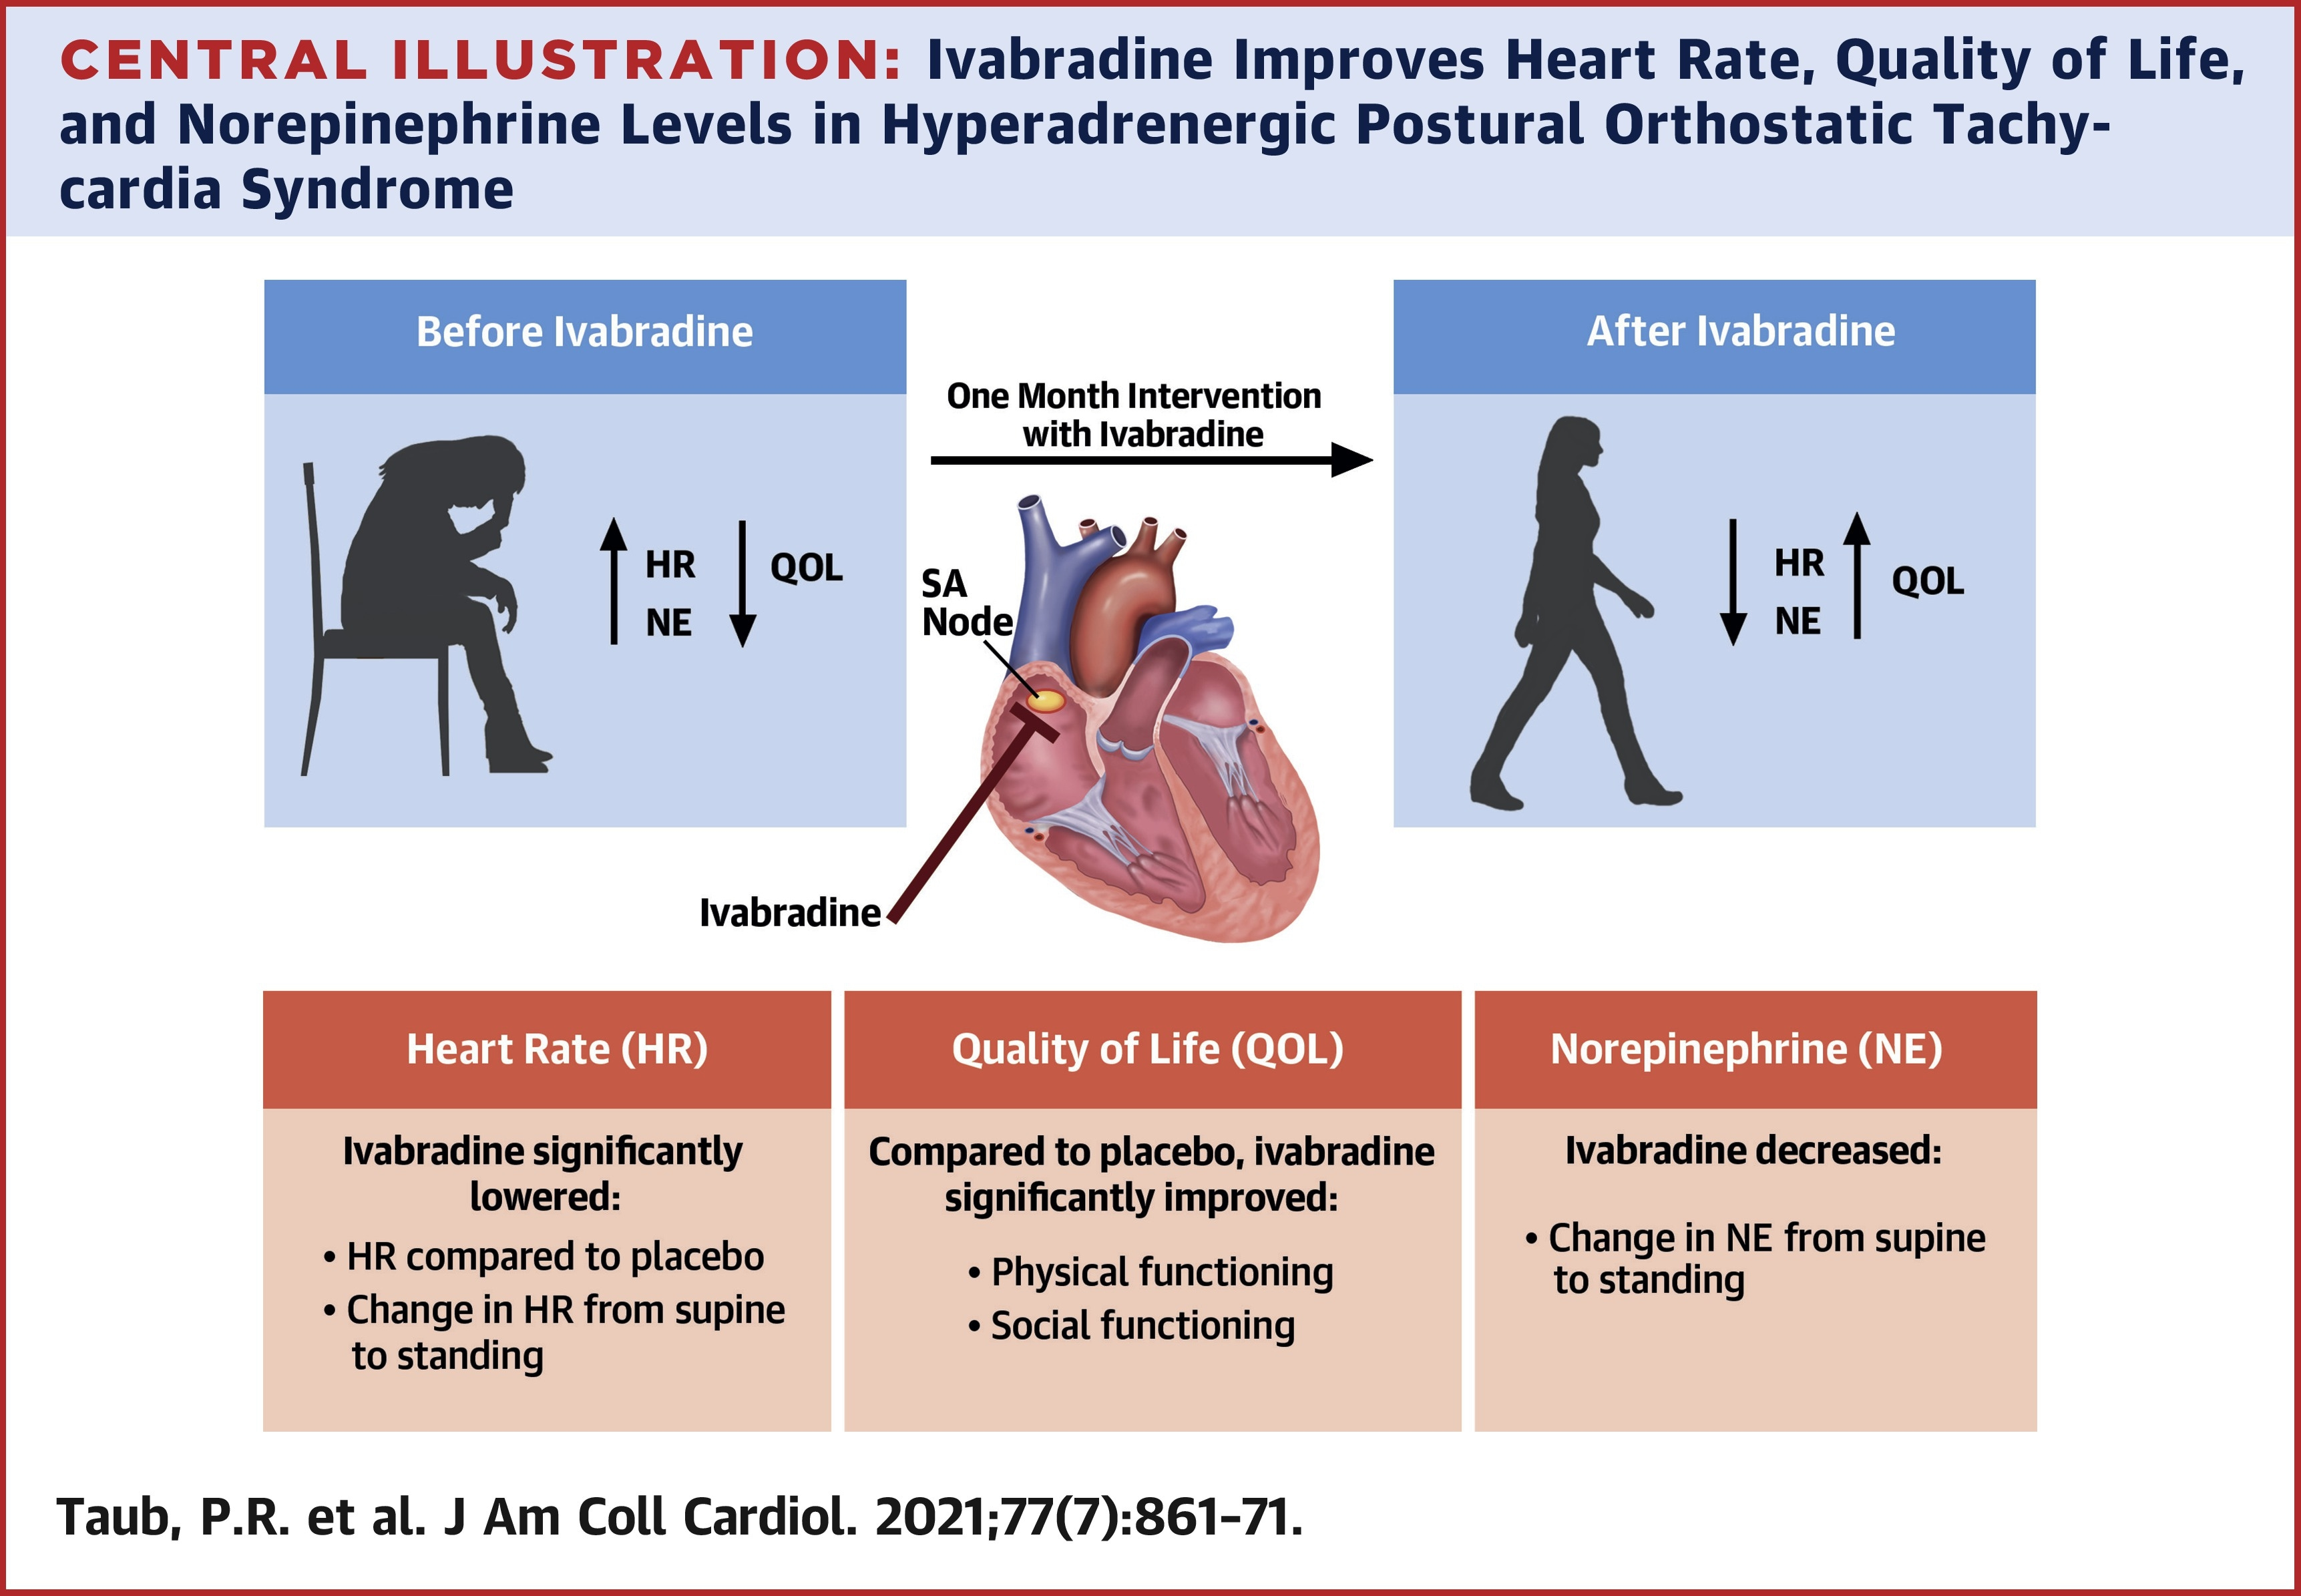 Ivabradine improves Heart Rate, Quality of Life, and Norepinephrine Levels in Hyperadrenergic Postural Orthostatic Tachycardia Syndrome